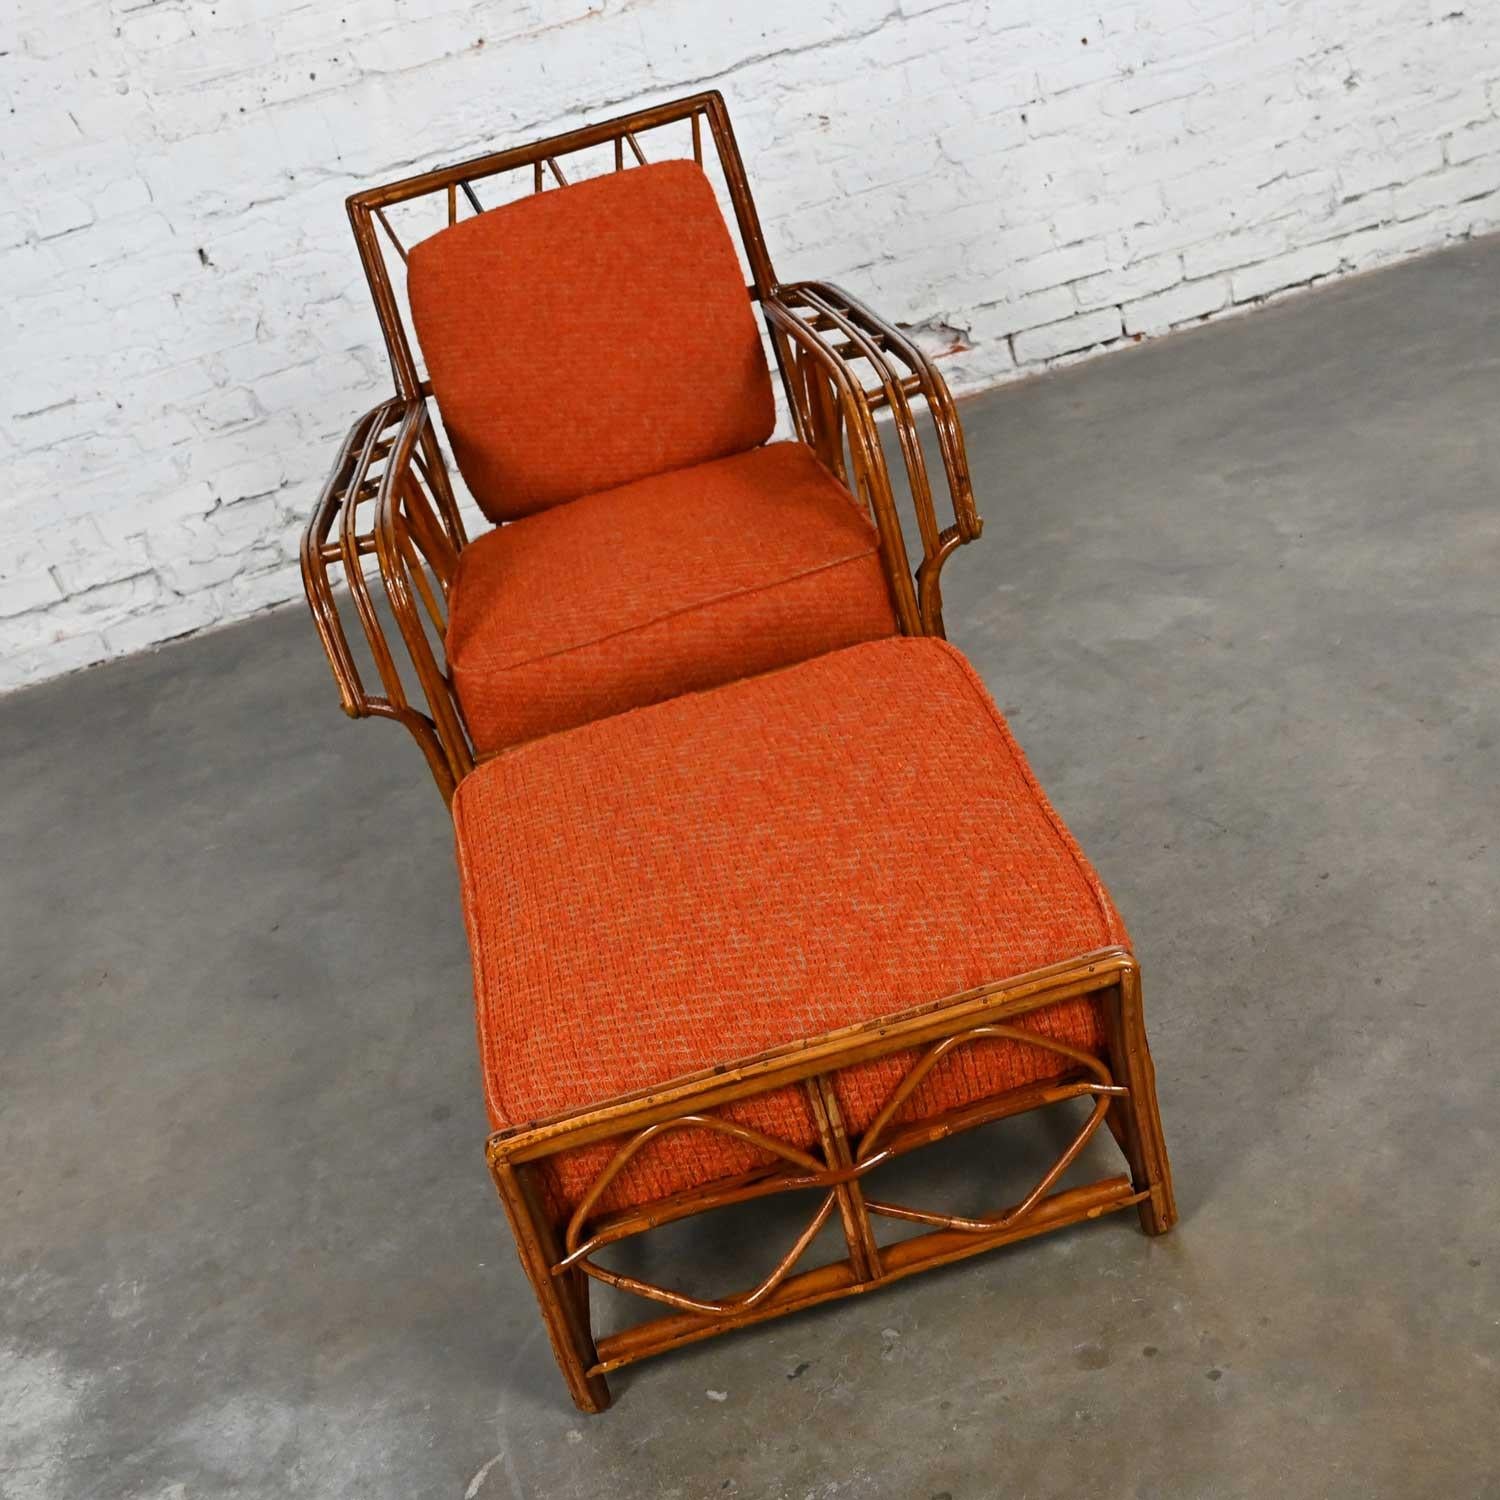 Campaign Rattan Lounge Chair & Ottoman Orange Fabric Cushions by Helmers Manufacturing Co